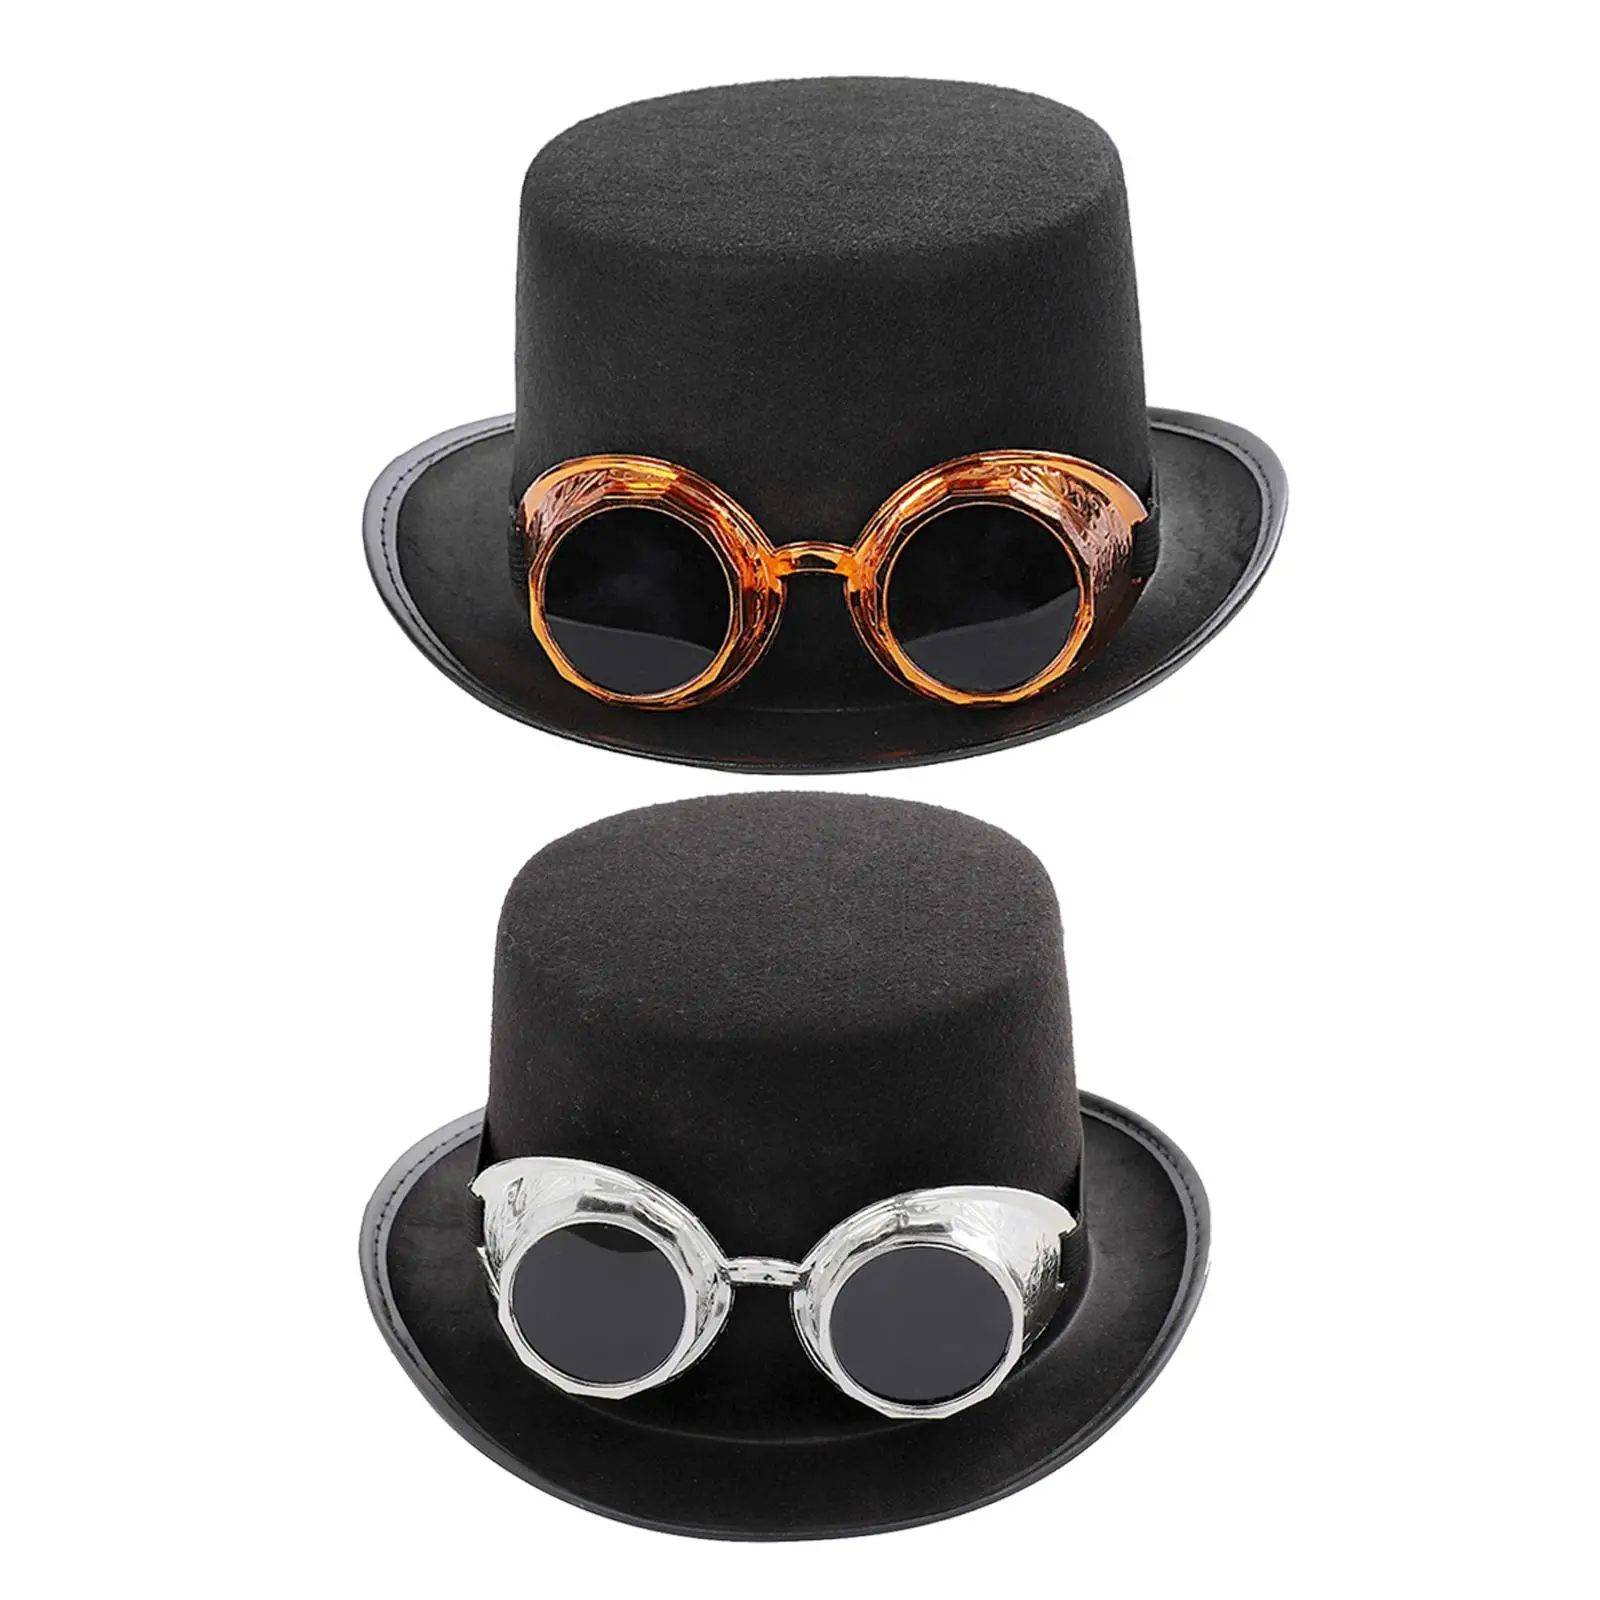 Goth Steampunk Top Hat with Goggles Cosplay Costume Hat for Men and Women